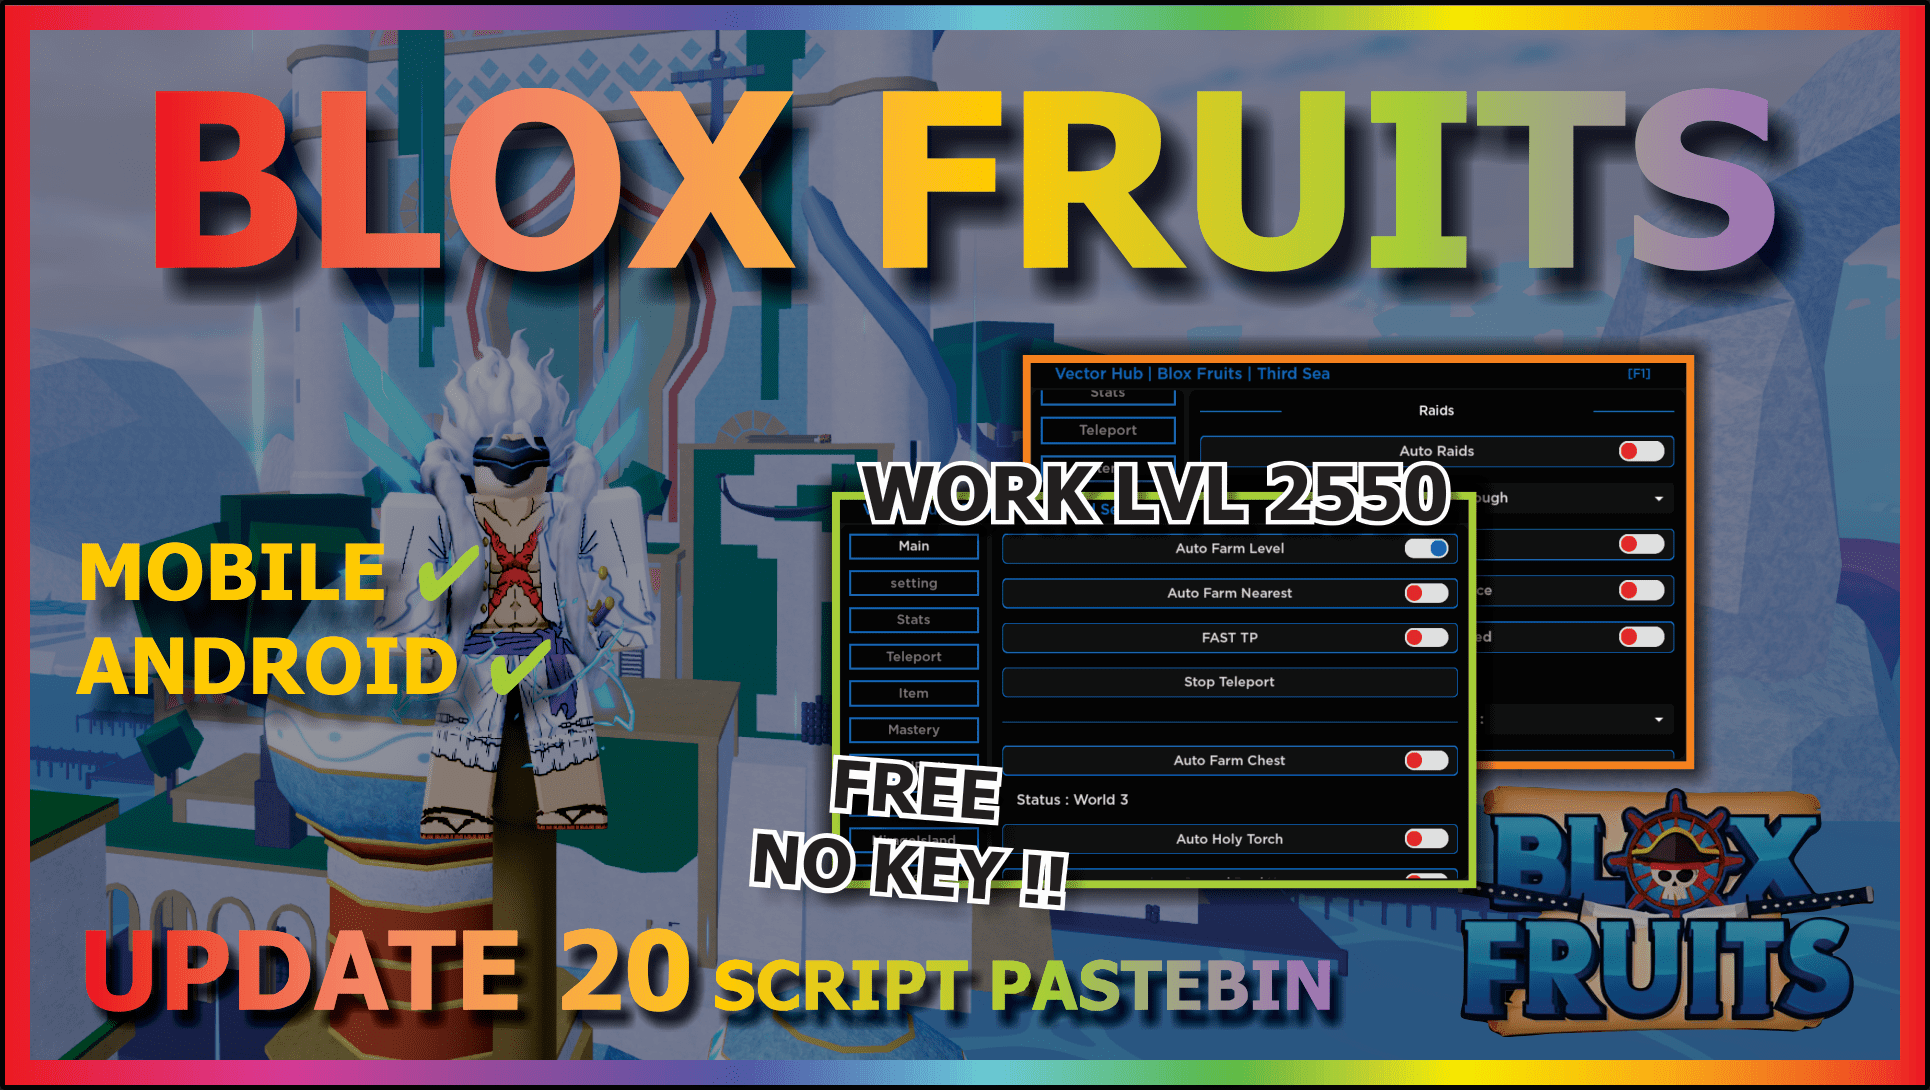 You are currently viewing BLOX FRUITS (WORK LVL 2550) 🍊⛵